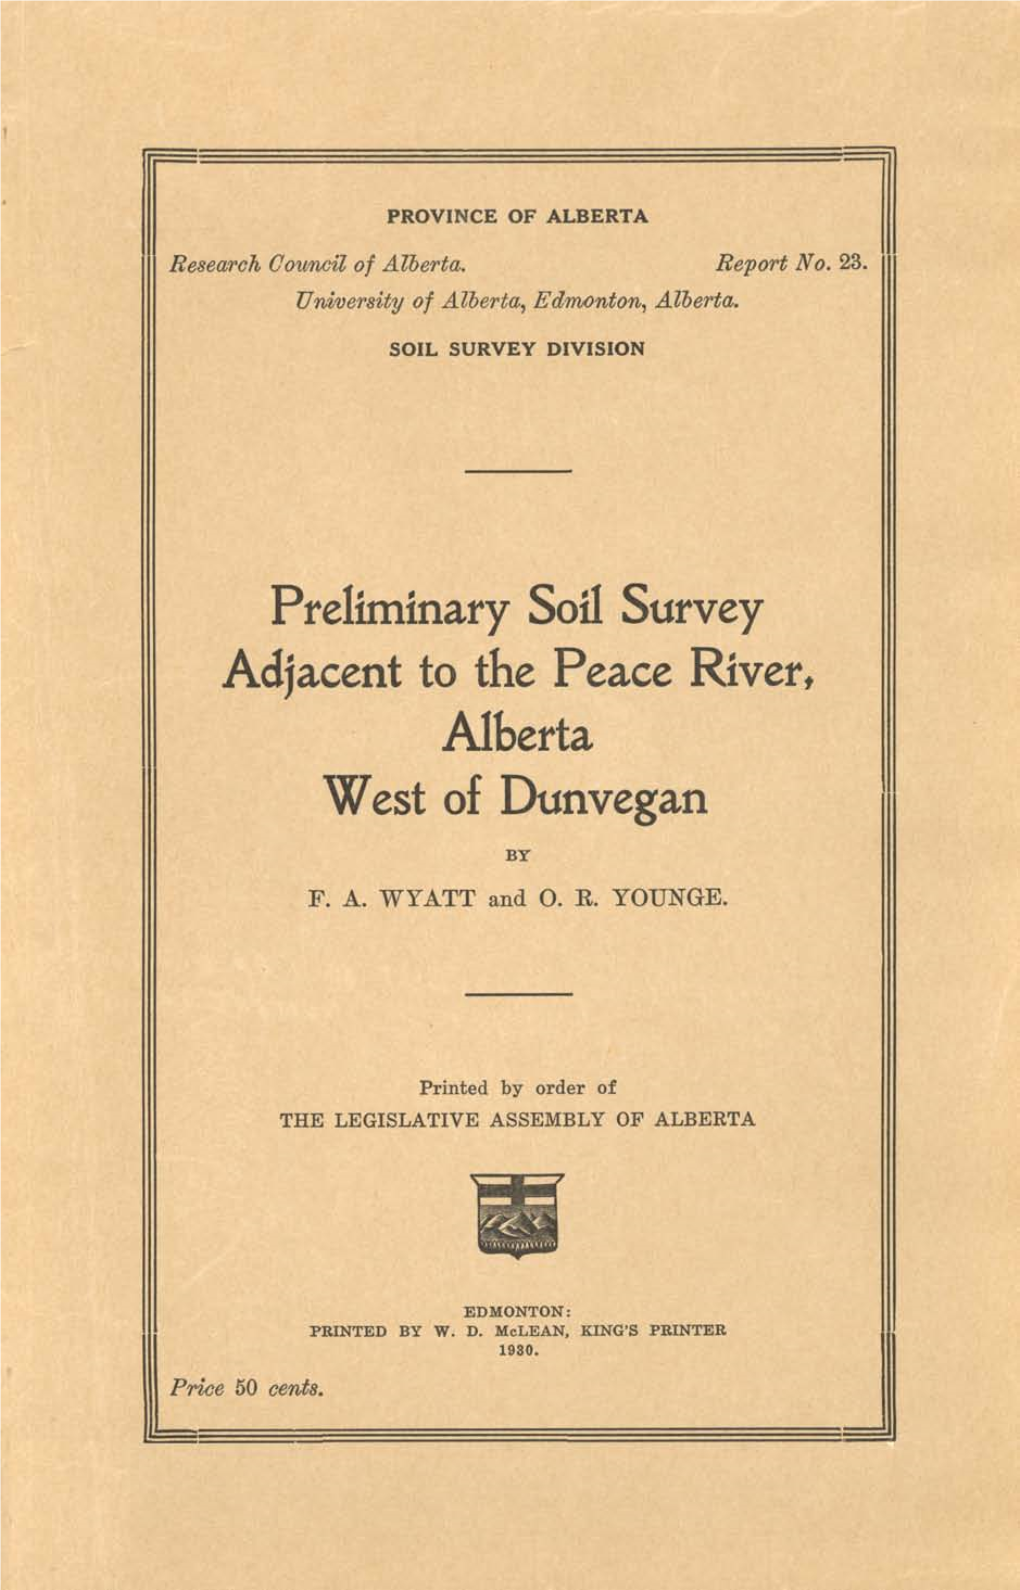 PRELIMINARY SOIL SURVEY ADJACENT to the PEACE RIVER, ALBERTA, WEST of DUNVEGAN, by F